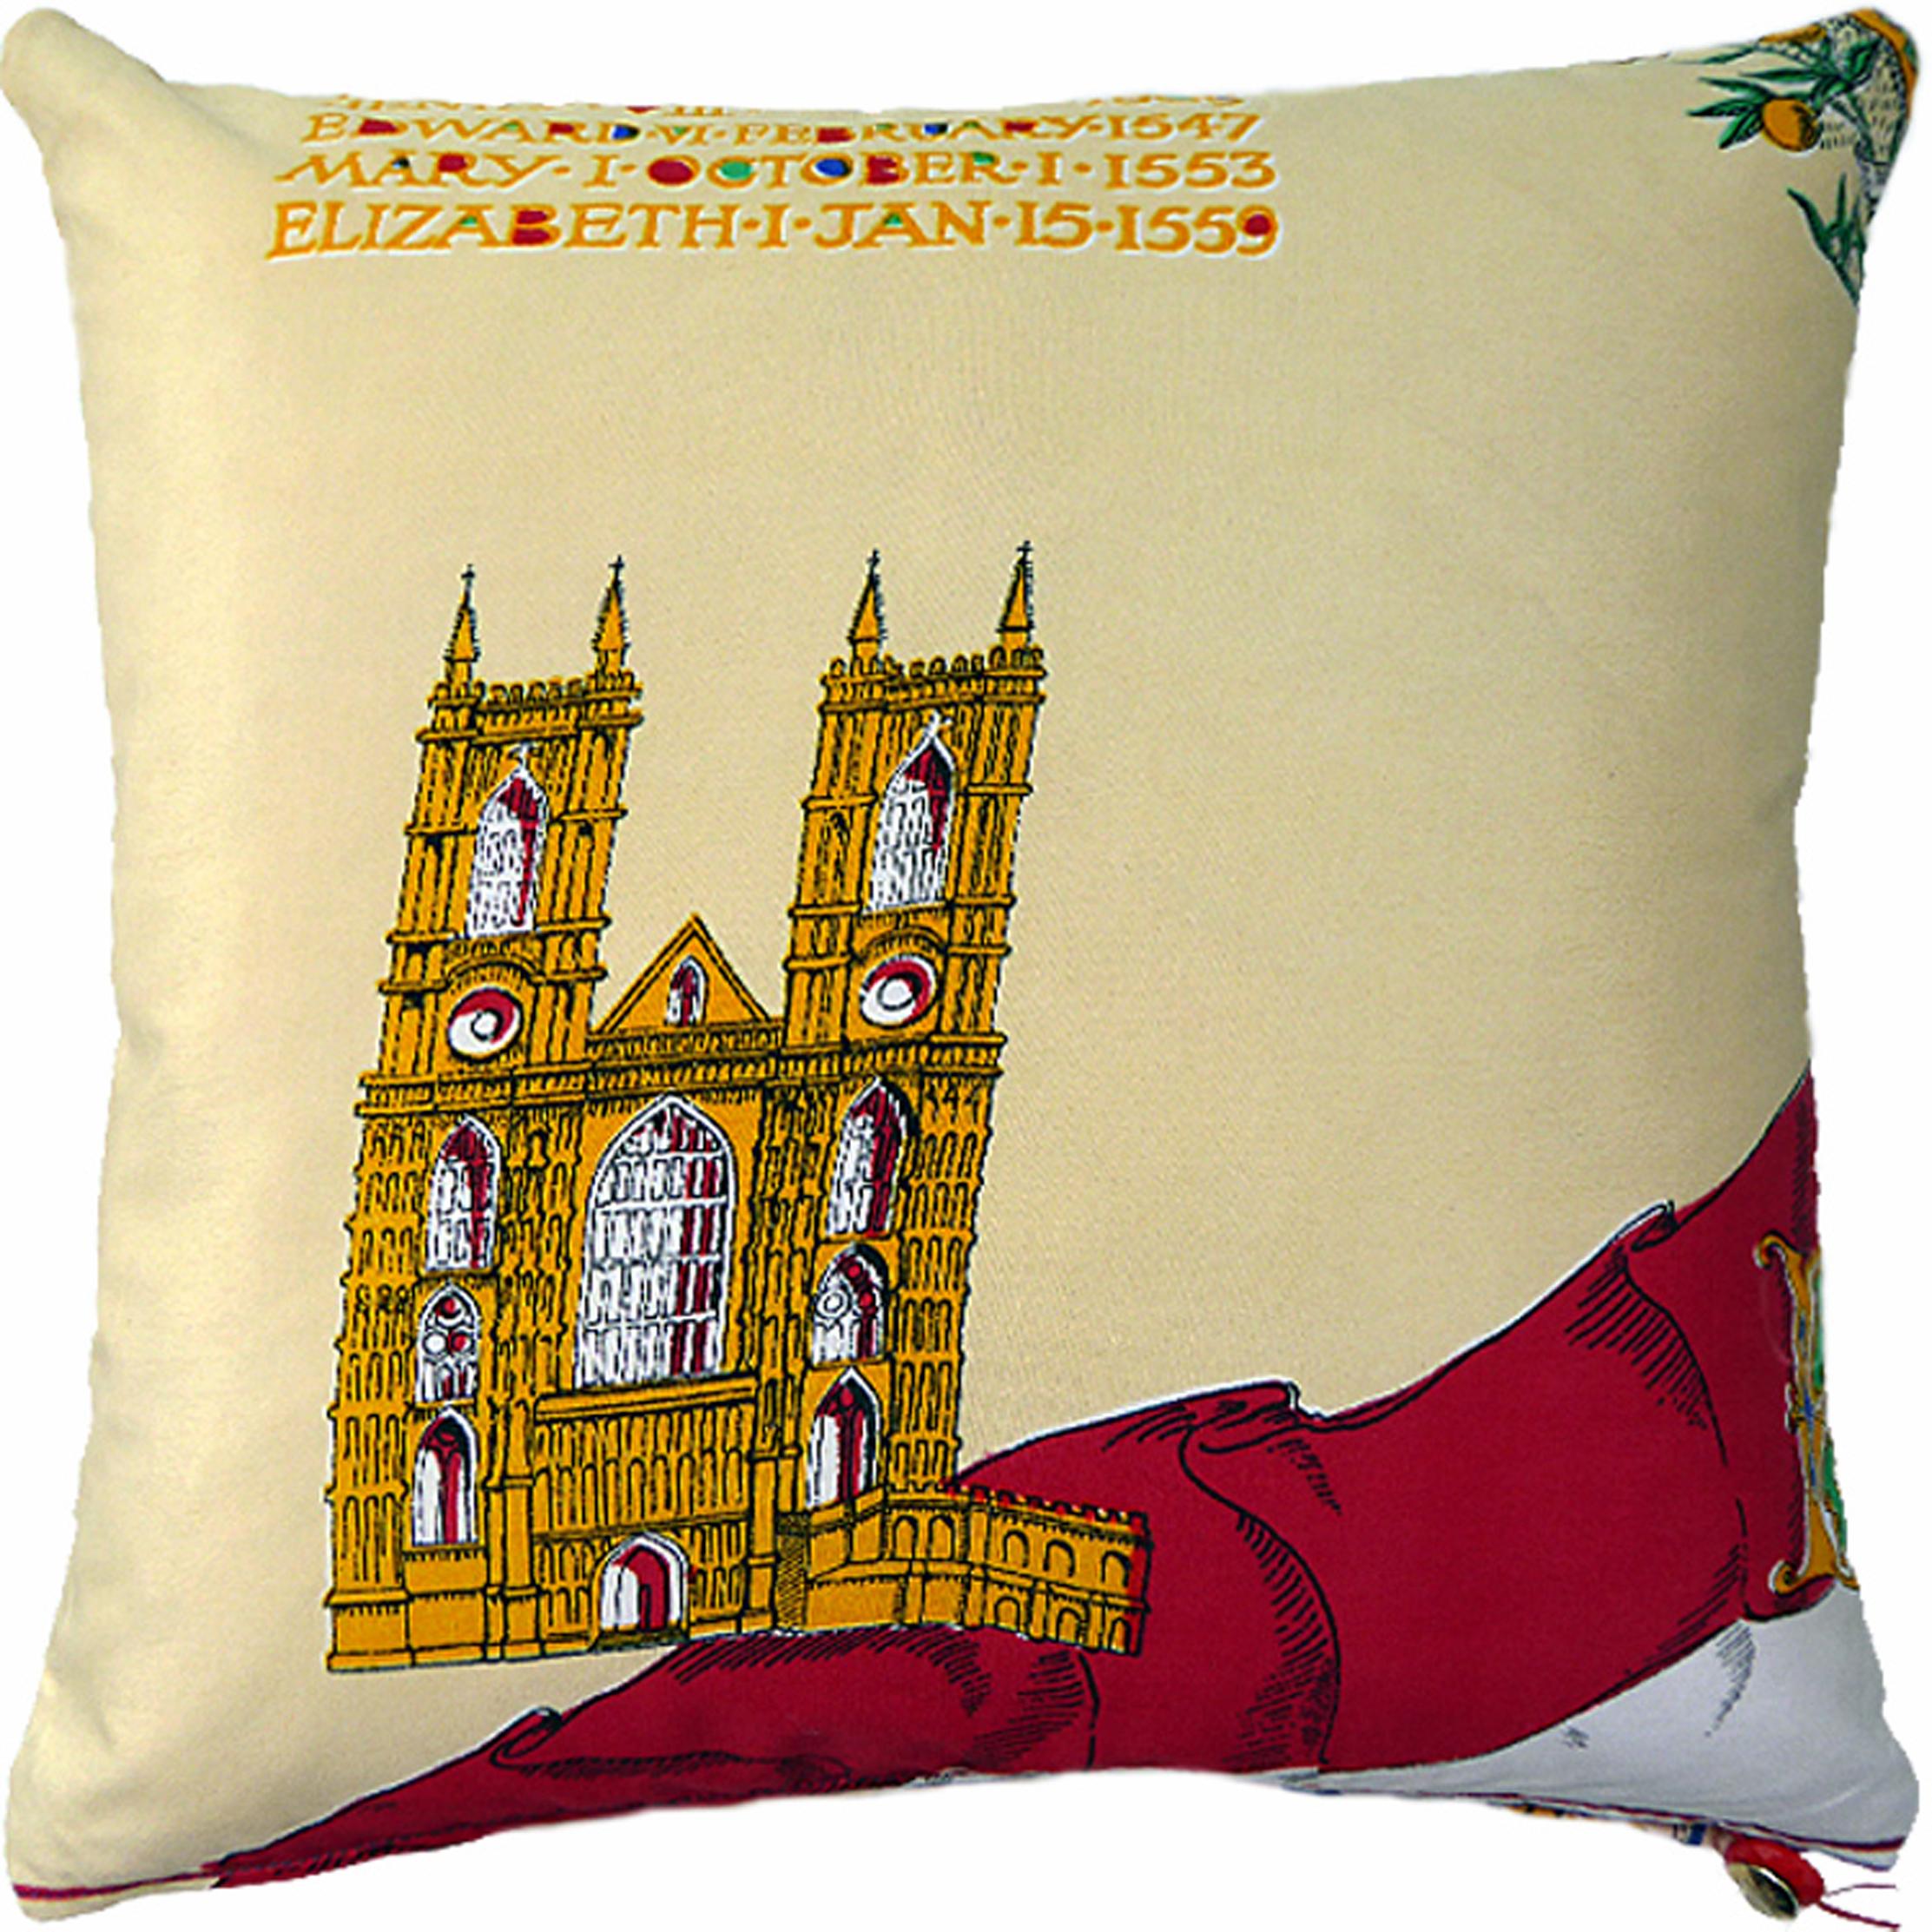 Vintage cushions, 'Princess Anne'
circa 1950
British made bespoke cushion created using original vintage fabrics featuring images of Princess Ann on the coronation day of her mother Queen Elizabeth II in 1953 complimented on the reverse side with